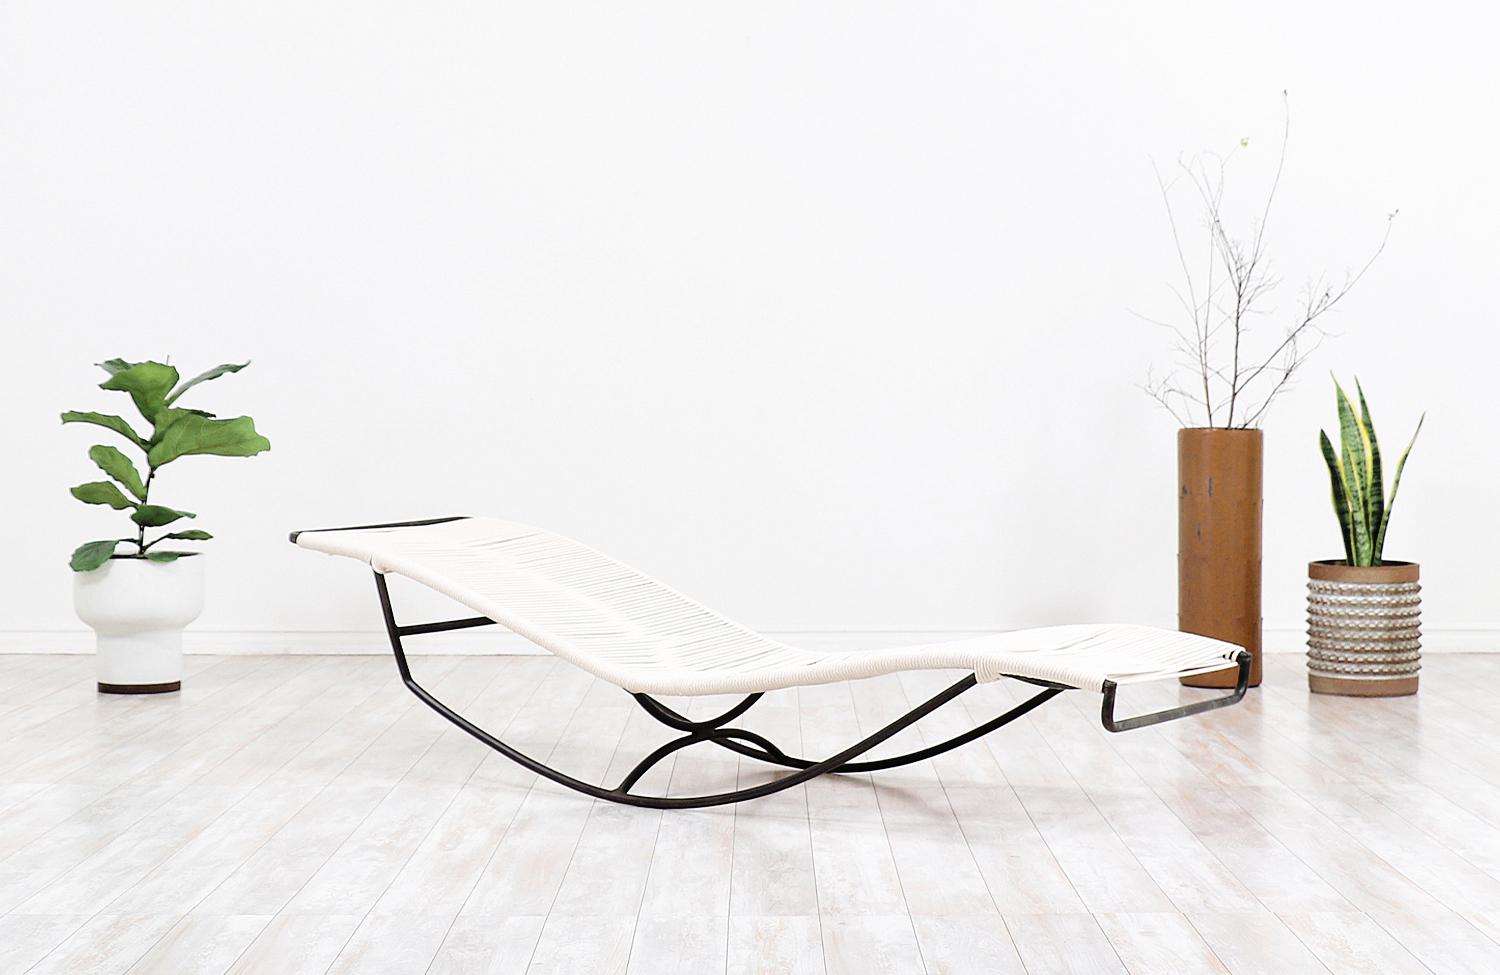 Chaise lounge designed by Walter Lamb for Brown Jordan in the United States c. 1950’s. Known for his outdoor furniture designs, Lamb’s “Waikiki” rocking chaise lounge chair features a tubular bronze frame and has been newly re-strung with flag